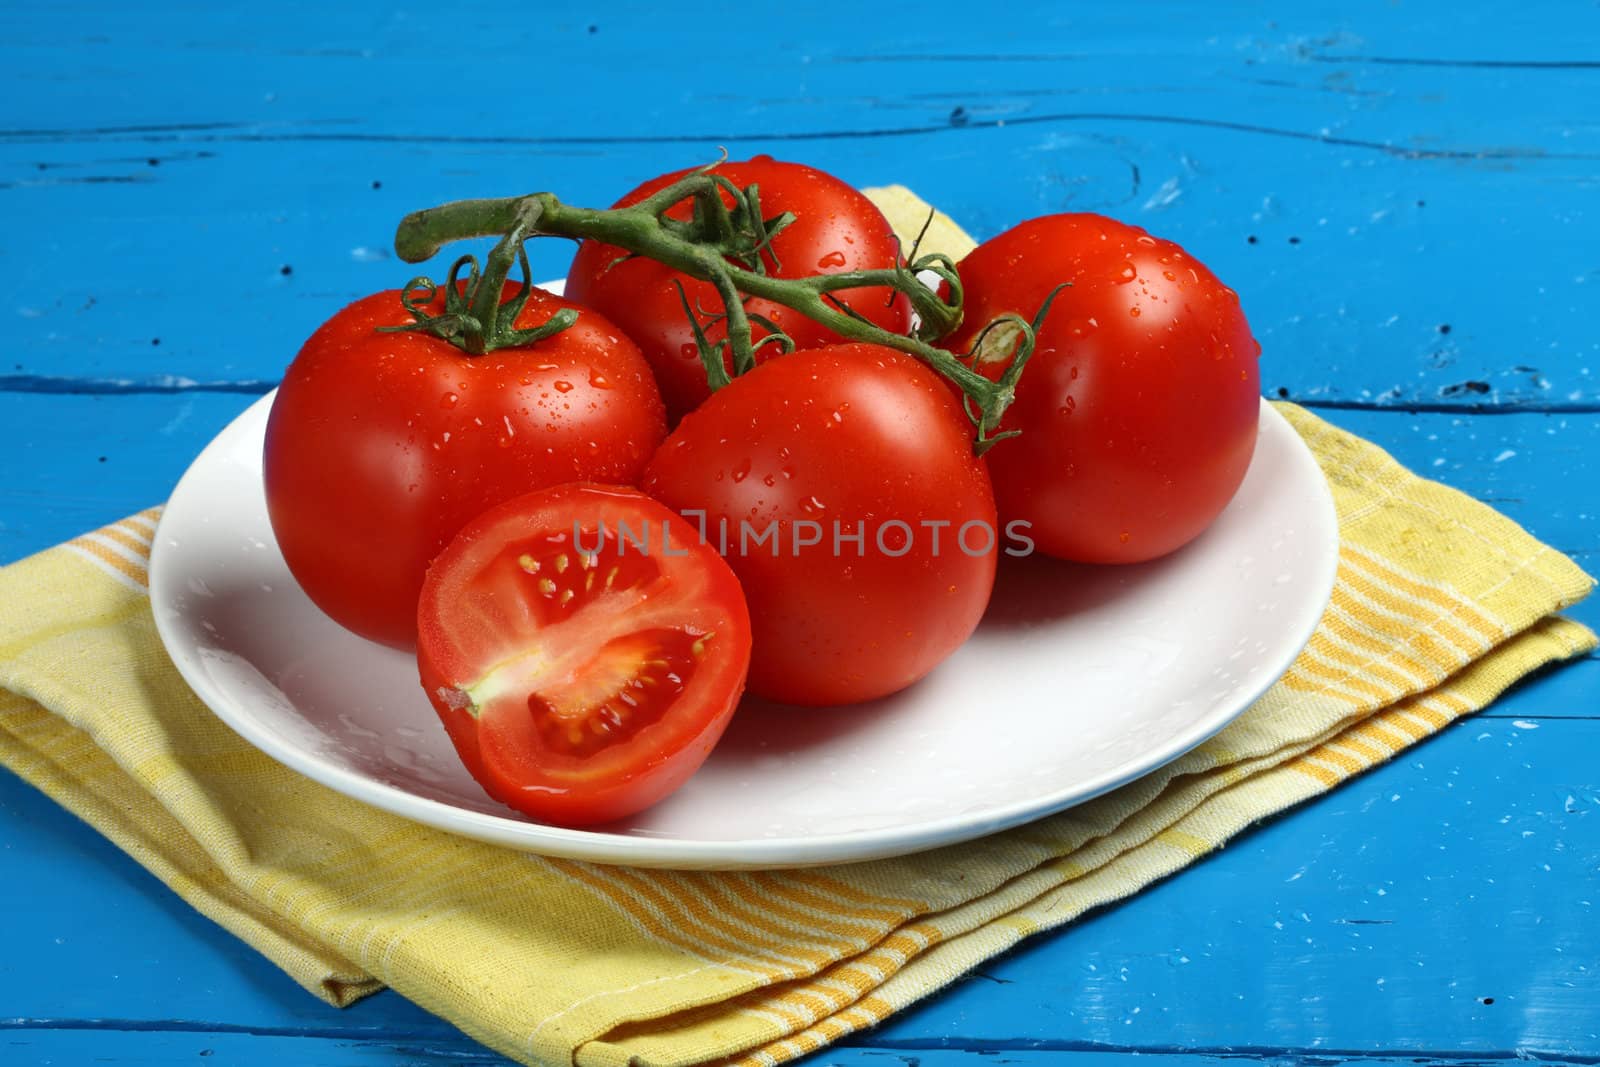 Close up of fresh tomatoes in plate on blue table